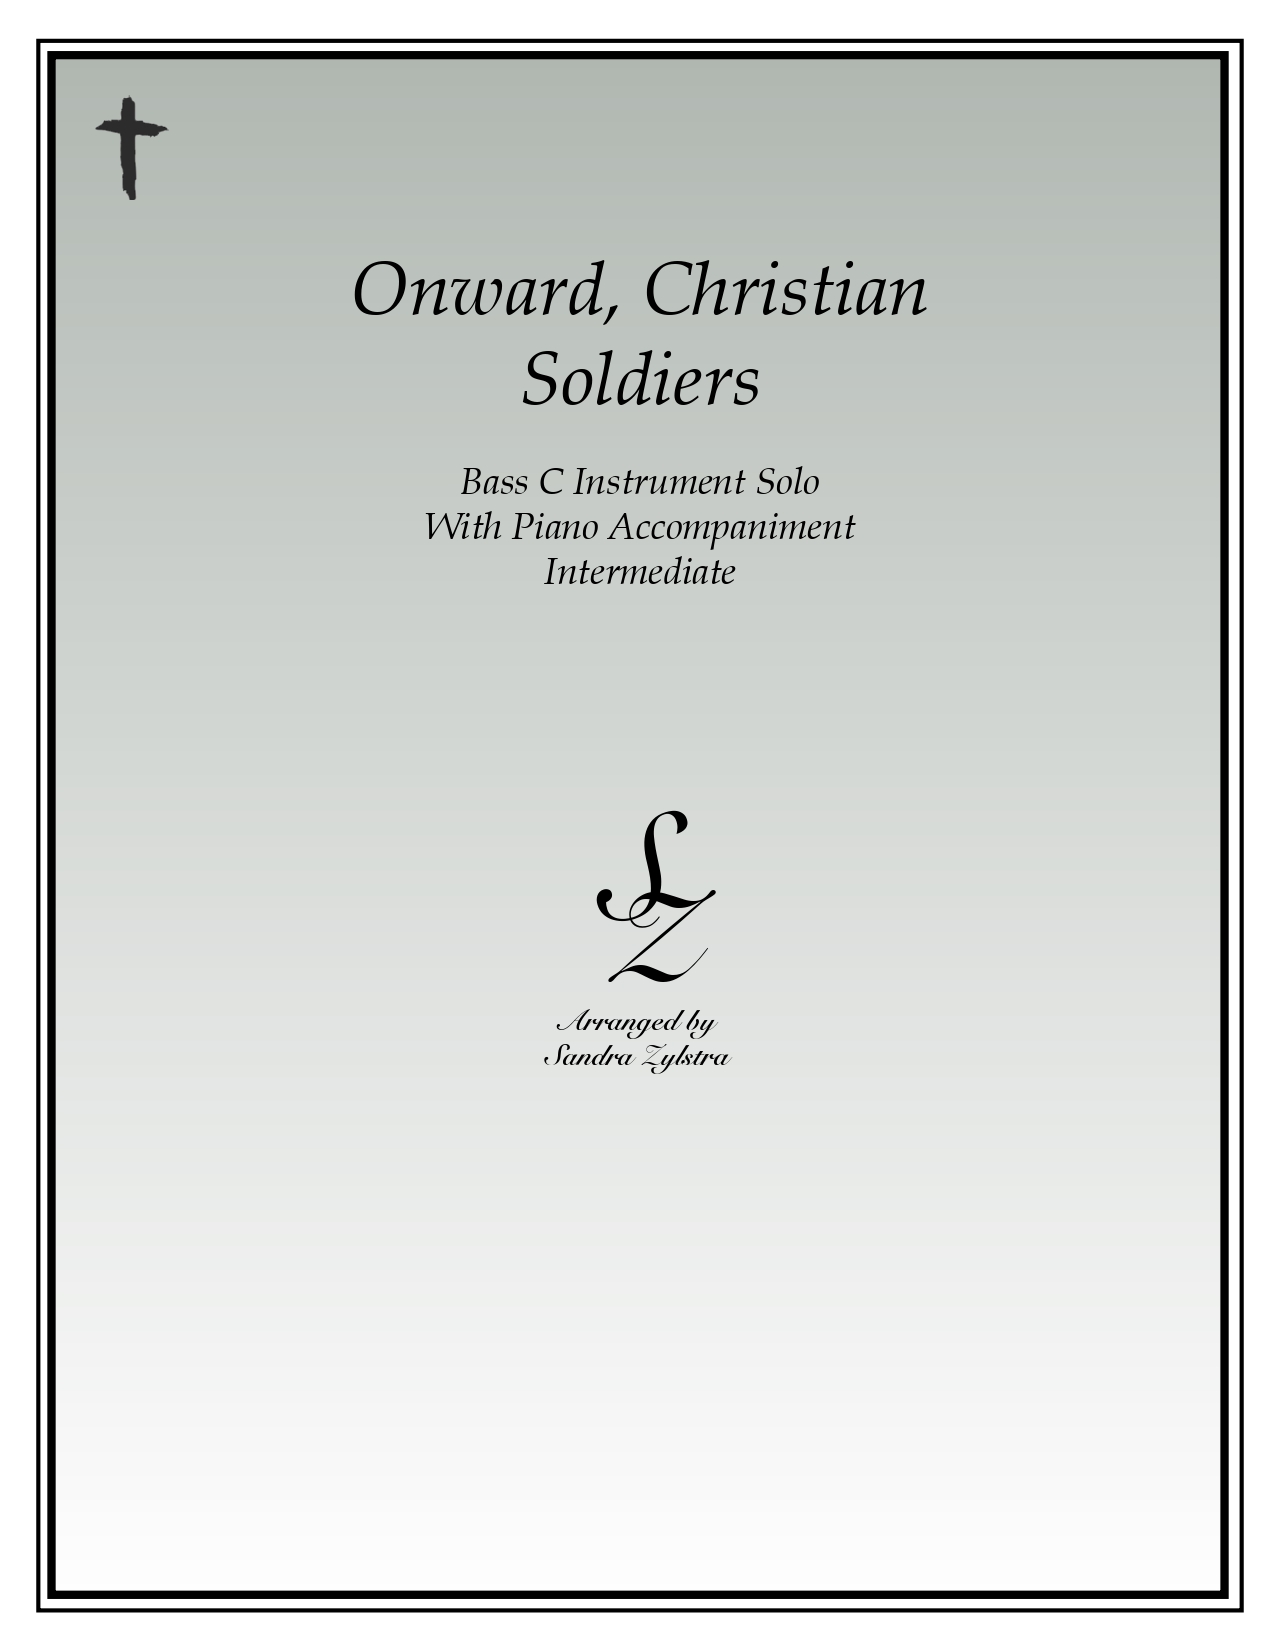 Onward Christian Soldiers bass C instrument solo part cover page 00011